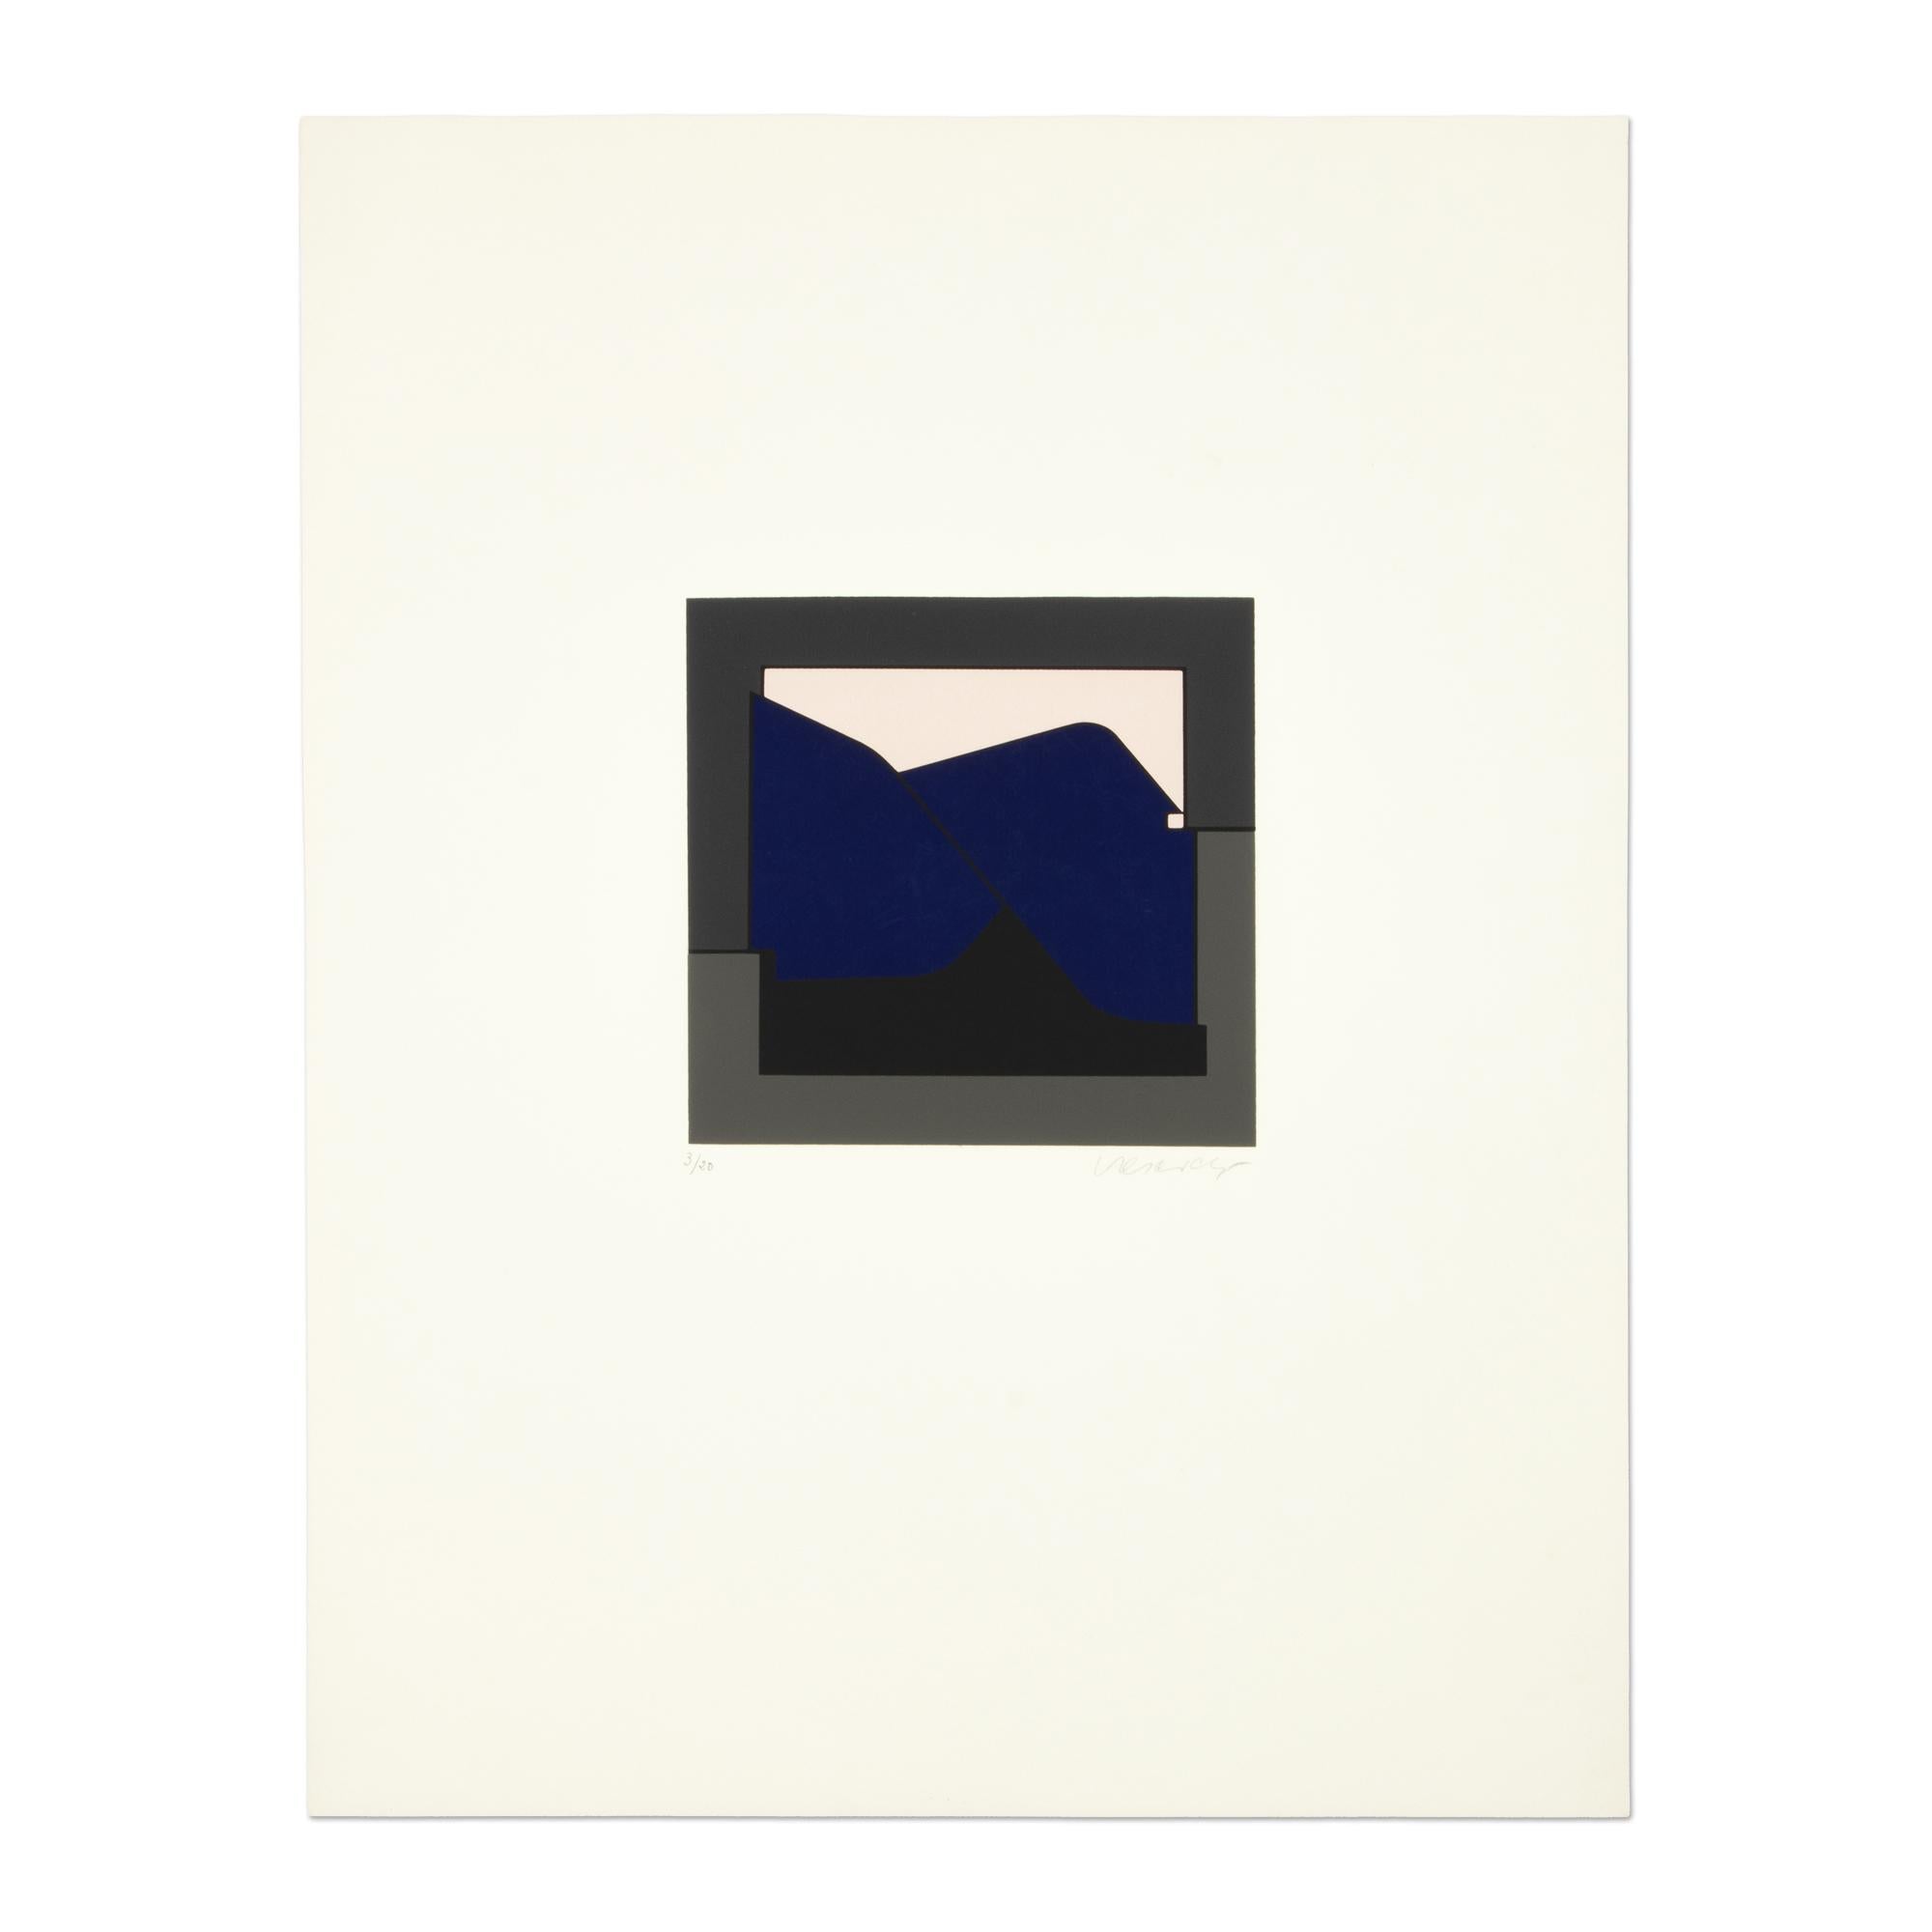 Victor Vasarely (Hungarian-French, 1906-1997)
Kandahar I (from "Album I" by Galerie Denise René), 1955
Medium: Screenprint in colors, on paper
Dimensions: 26 × 20 1/10 in (66 × 51 cm)
Edition of 100 + 20: Hand-signed and numbered
Publisher: Galerie